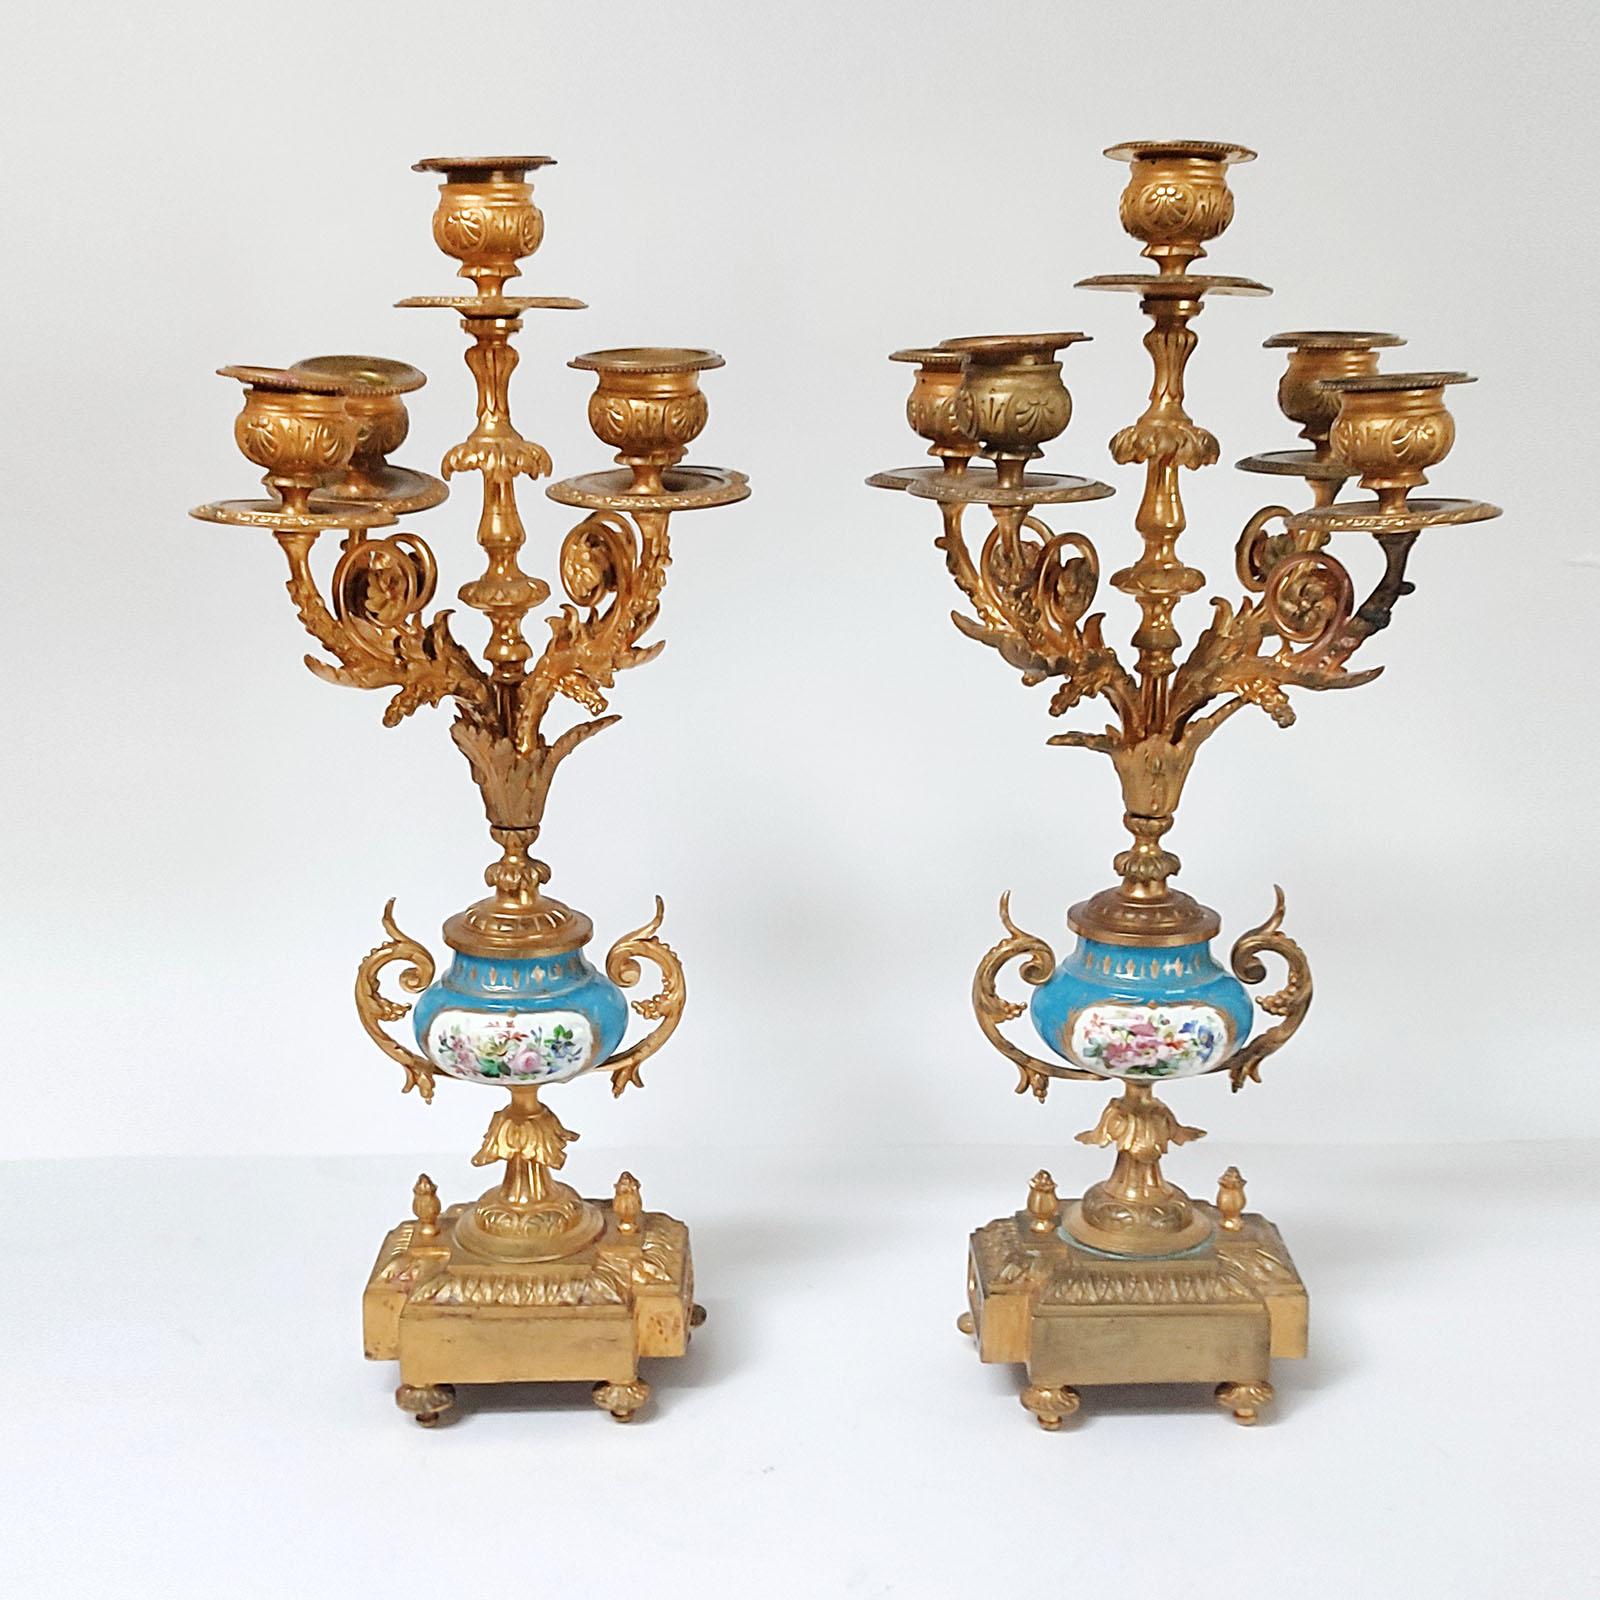 French Ormolu and Porcelain Mantle Clock and Pair of Candelabra, 19th Century 9